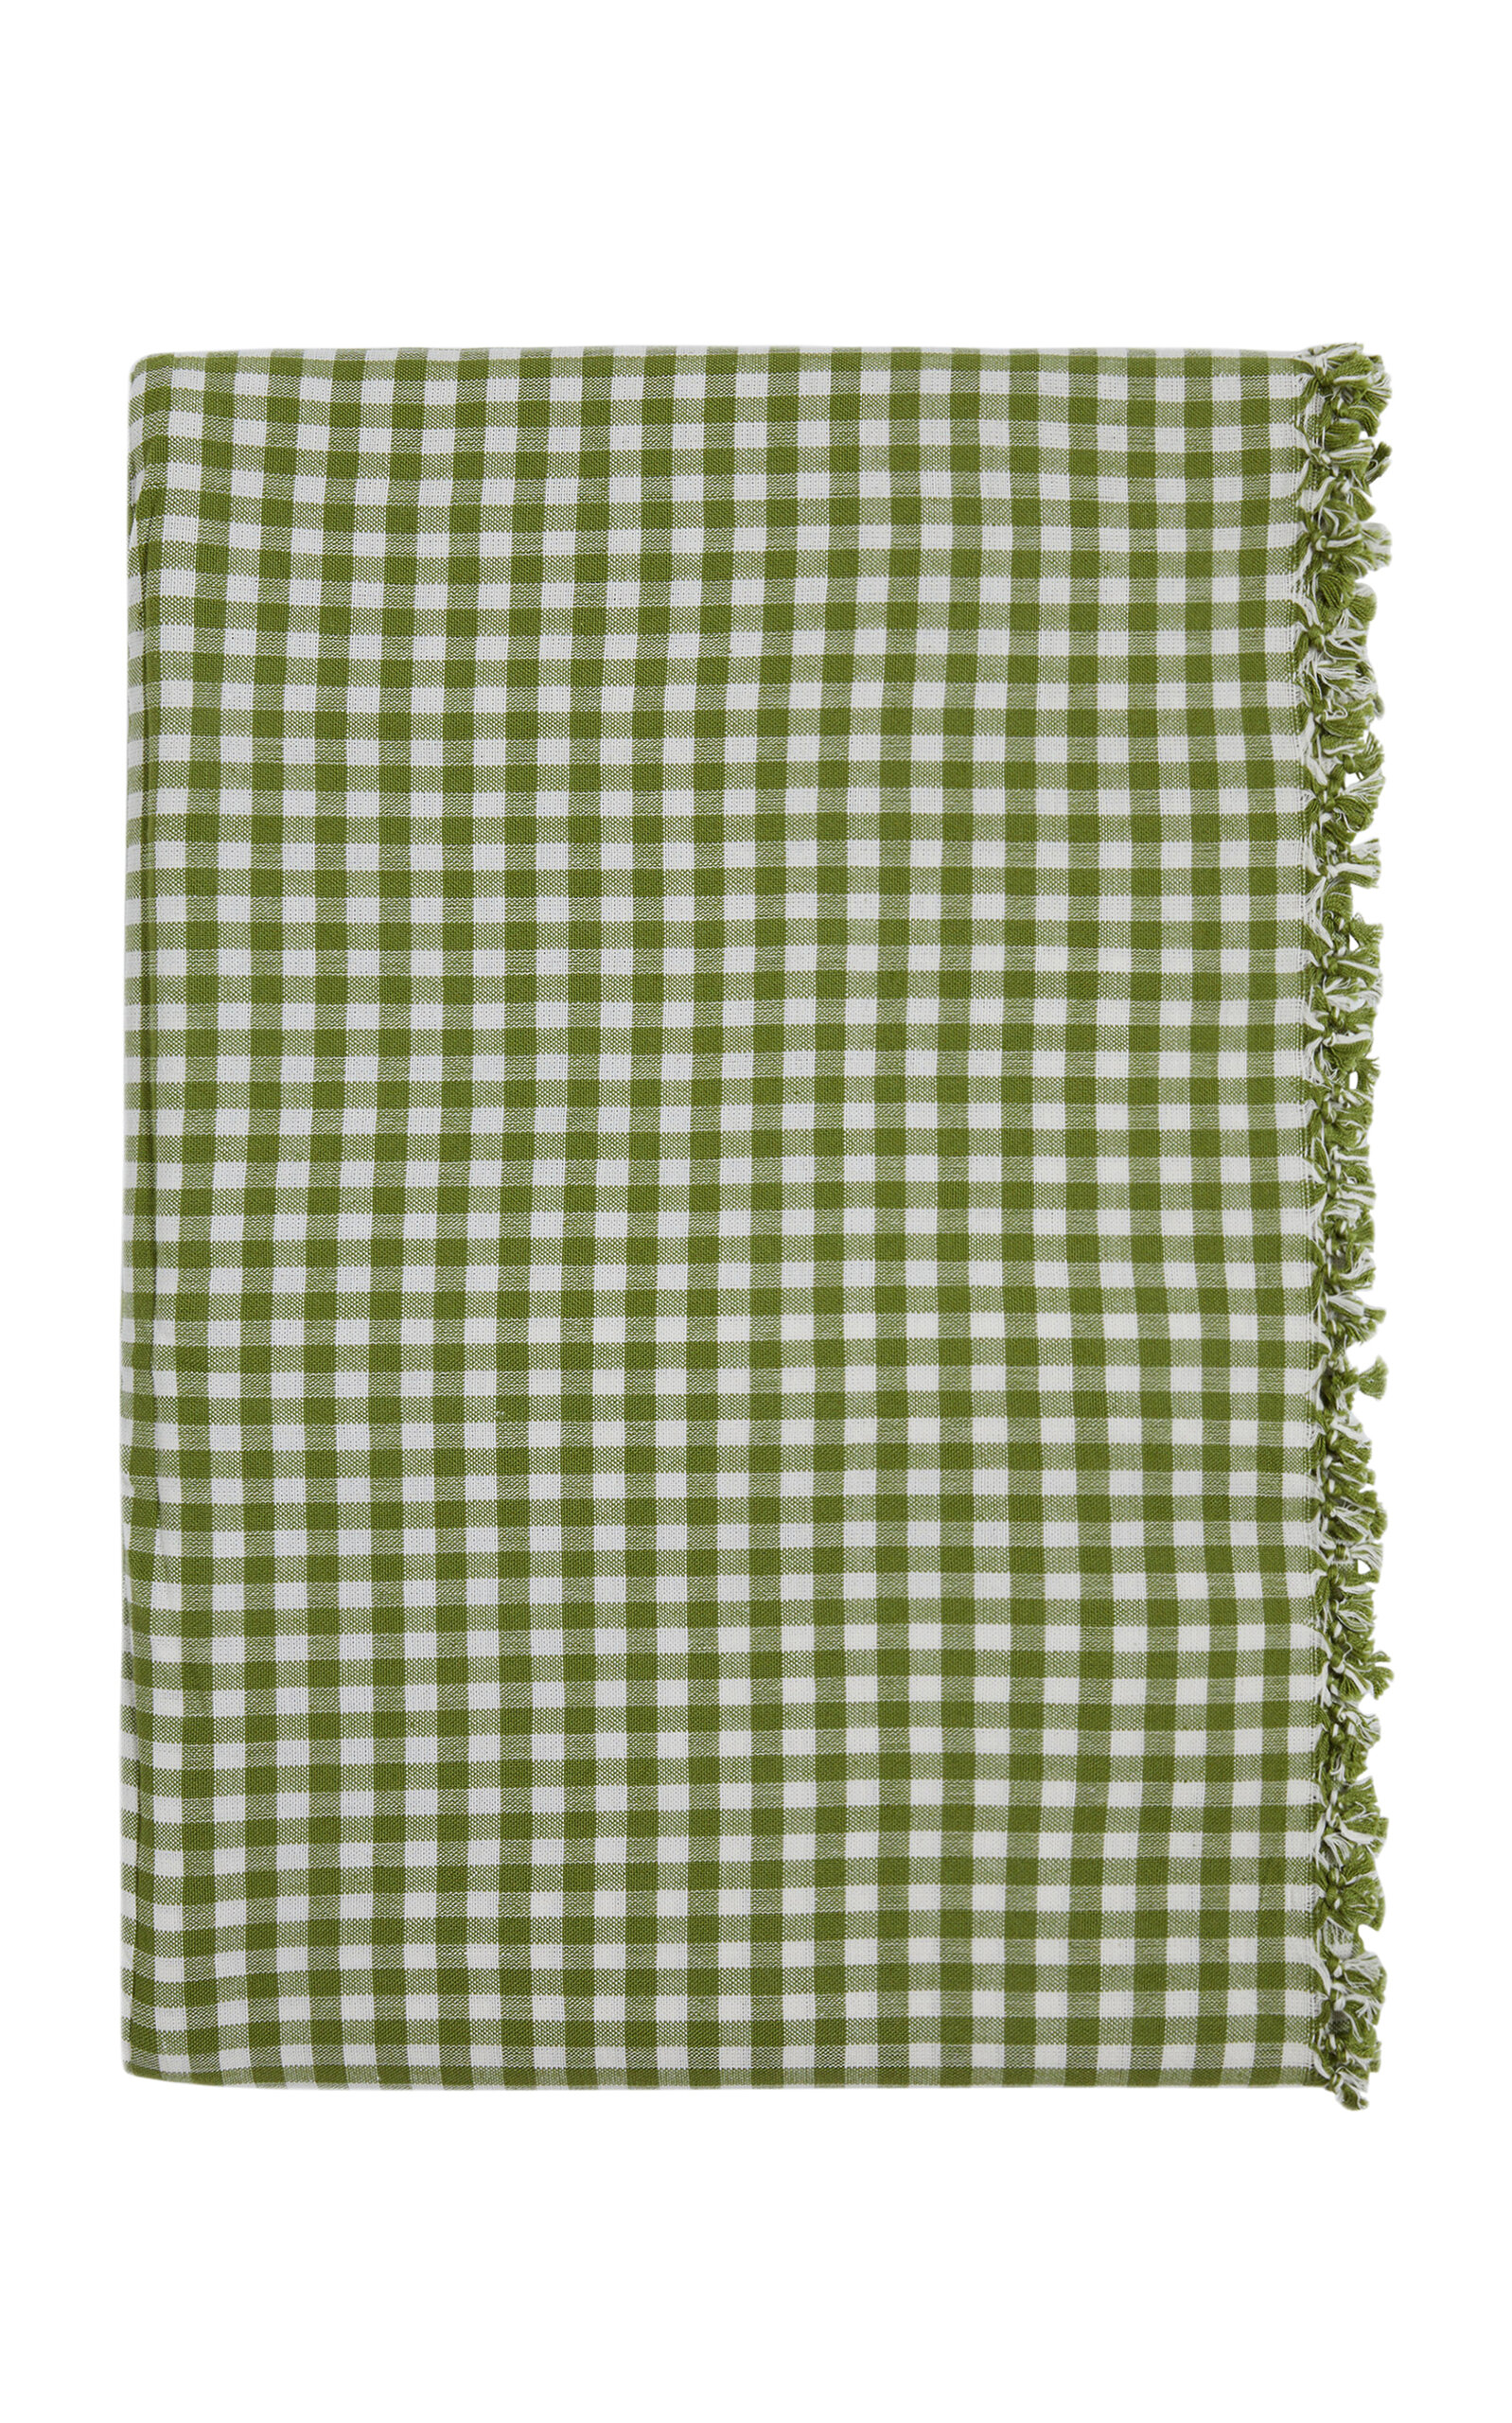 Heather Taylor Home Mini Gingham Olive Tablecloth Large In Green